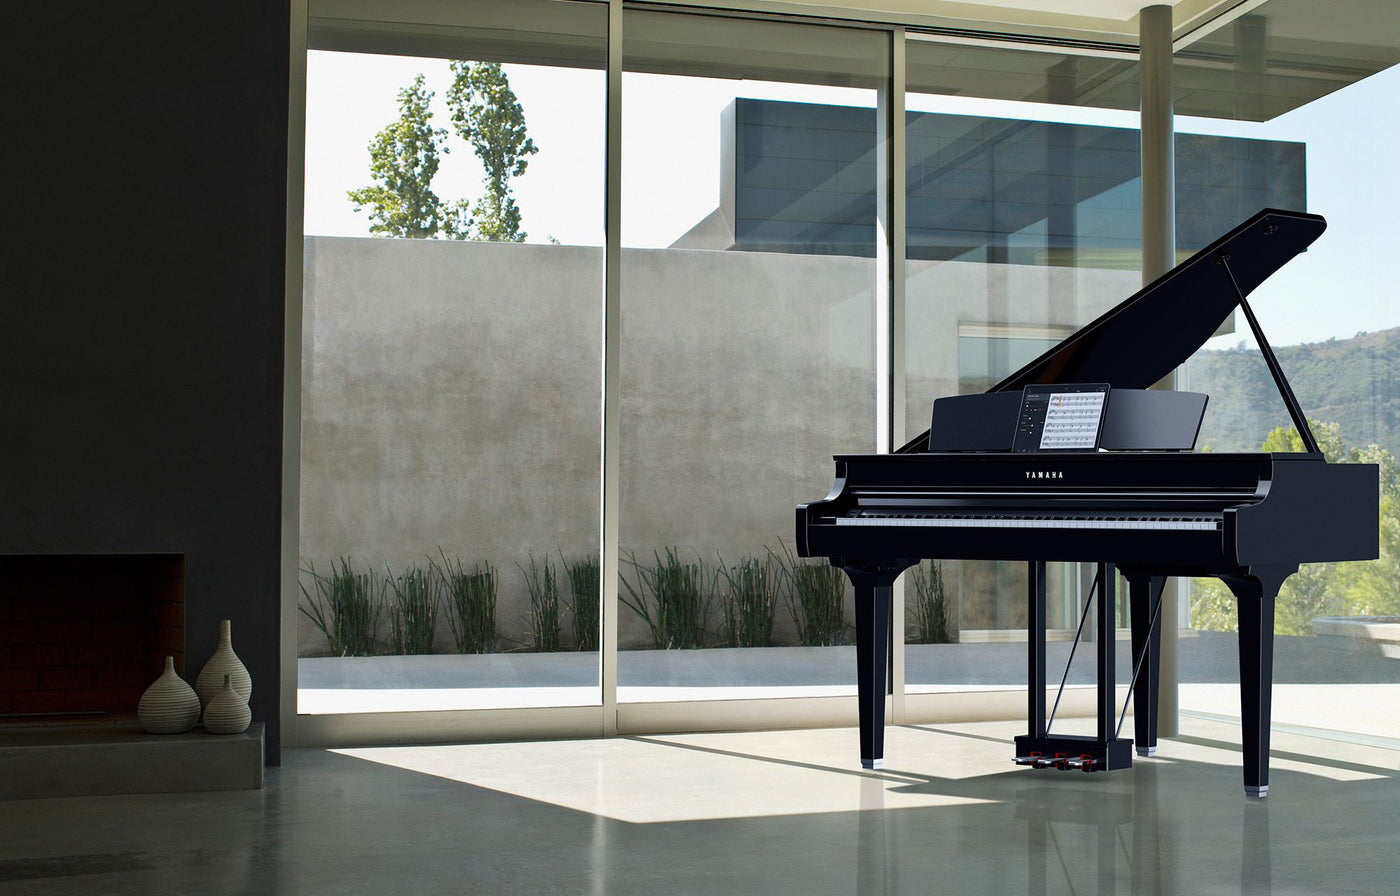 A sleek black grand piano by Yamaha positioned in a modern, sunlit room with floor-to-ceiling windows overlooking a serene landscape, highlighting the elegance and contemporary design suitable for a refined musical setting.